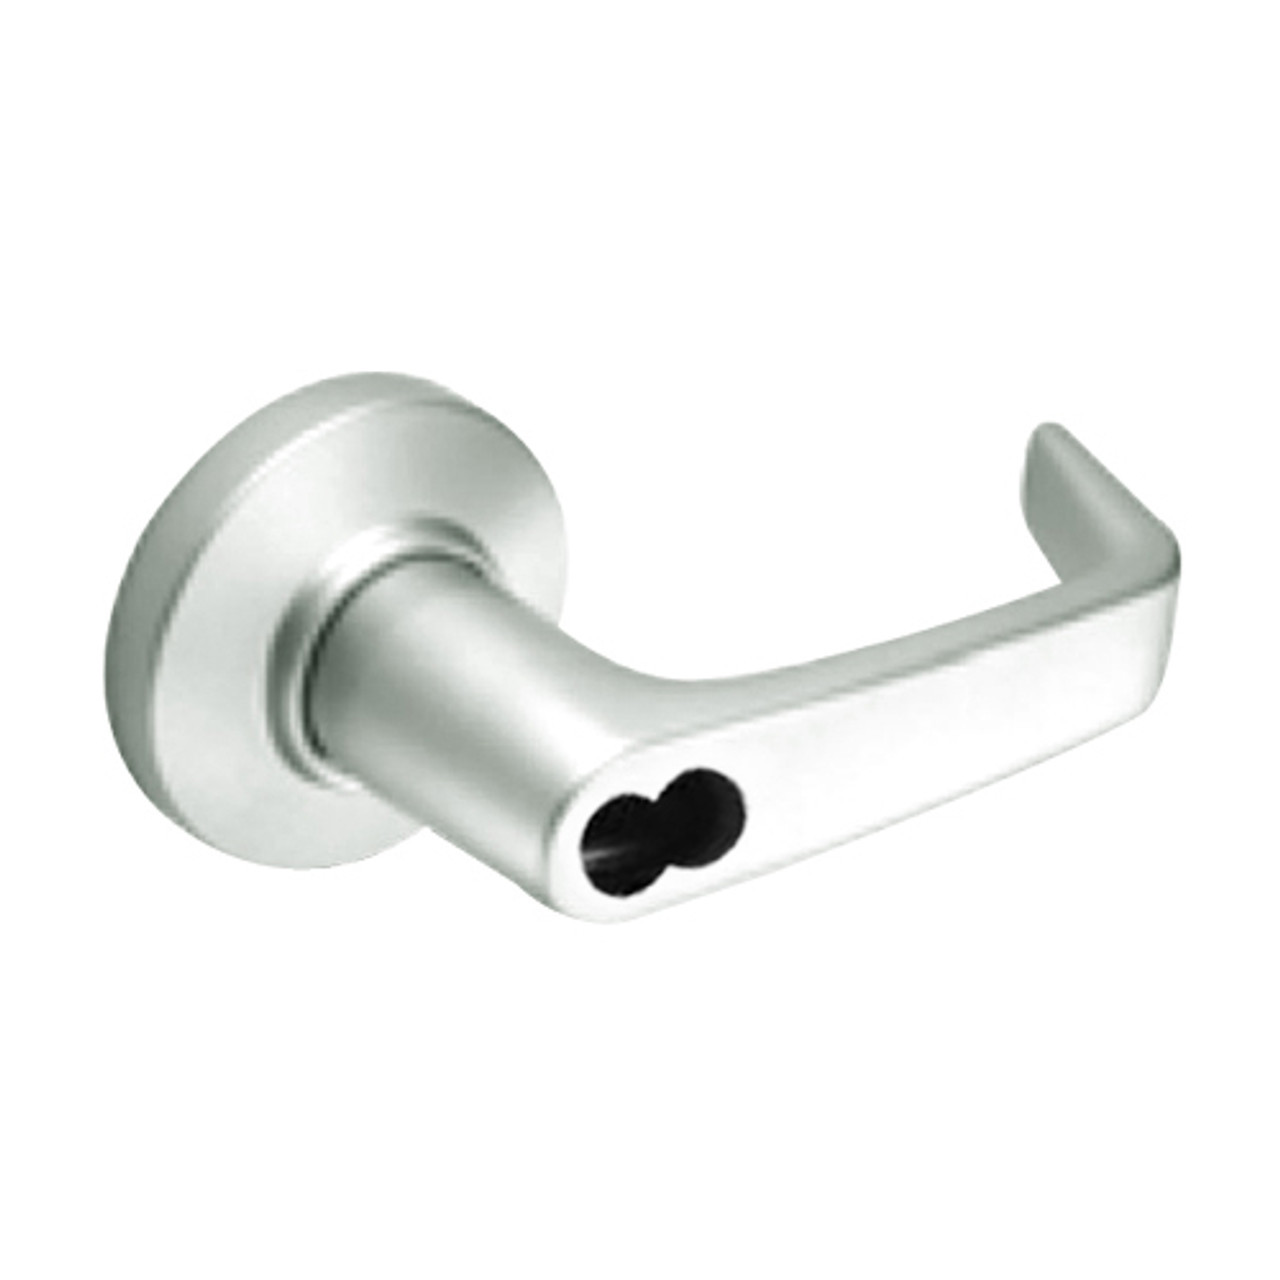 9K37A15CSTK618LM Best 9K Series Dormitory or Storeroom Cylindrical Lever Locks with Contour Angle with Return Lever Design Accept 7 Pin Best Core in Bright Nickel